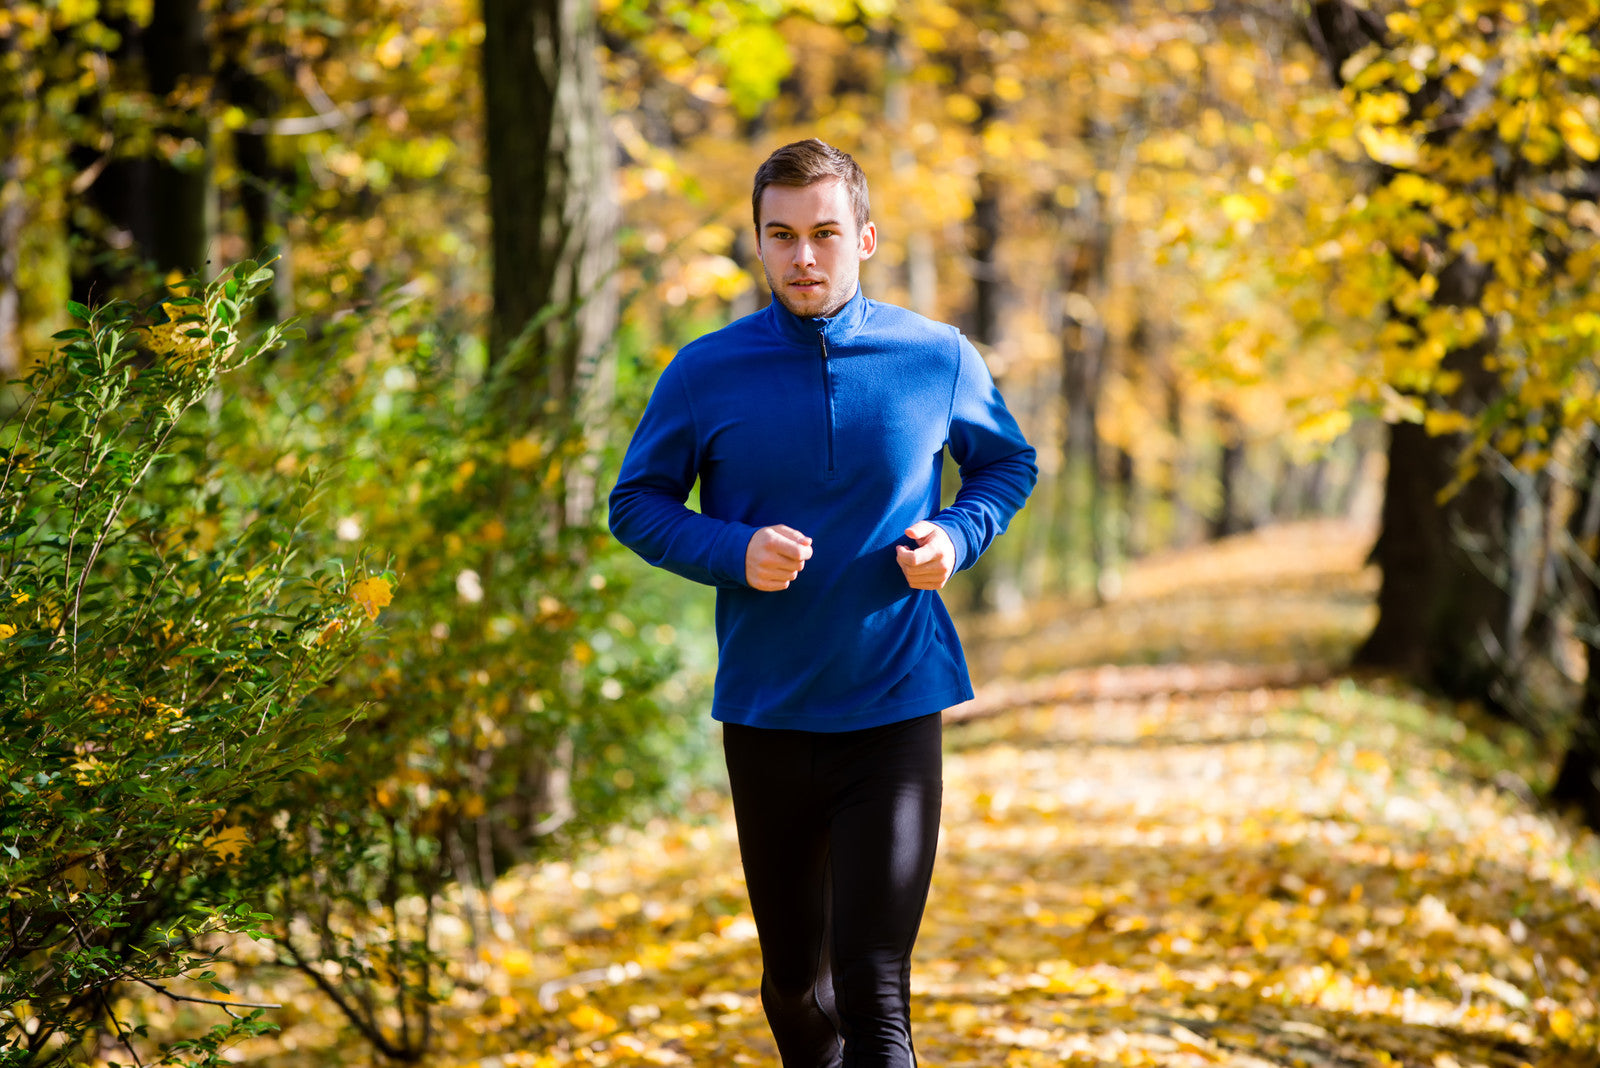 Man running illustrates some of the benefits of probiotics. They help with digestion and assimilation, regular bowel movements. They strengthen the immune system and fight pathogenic bacteria, viruses and yeast.